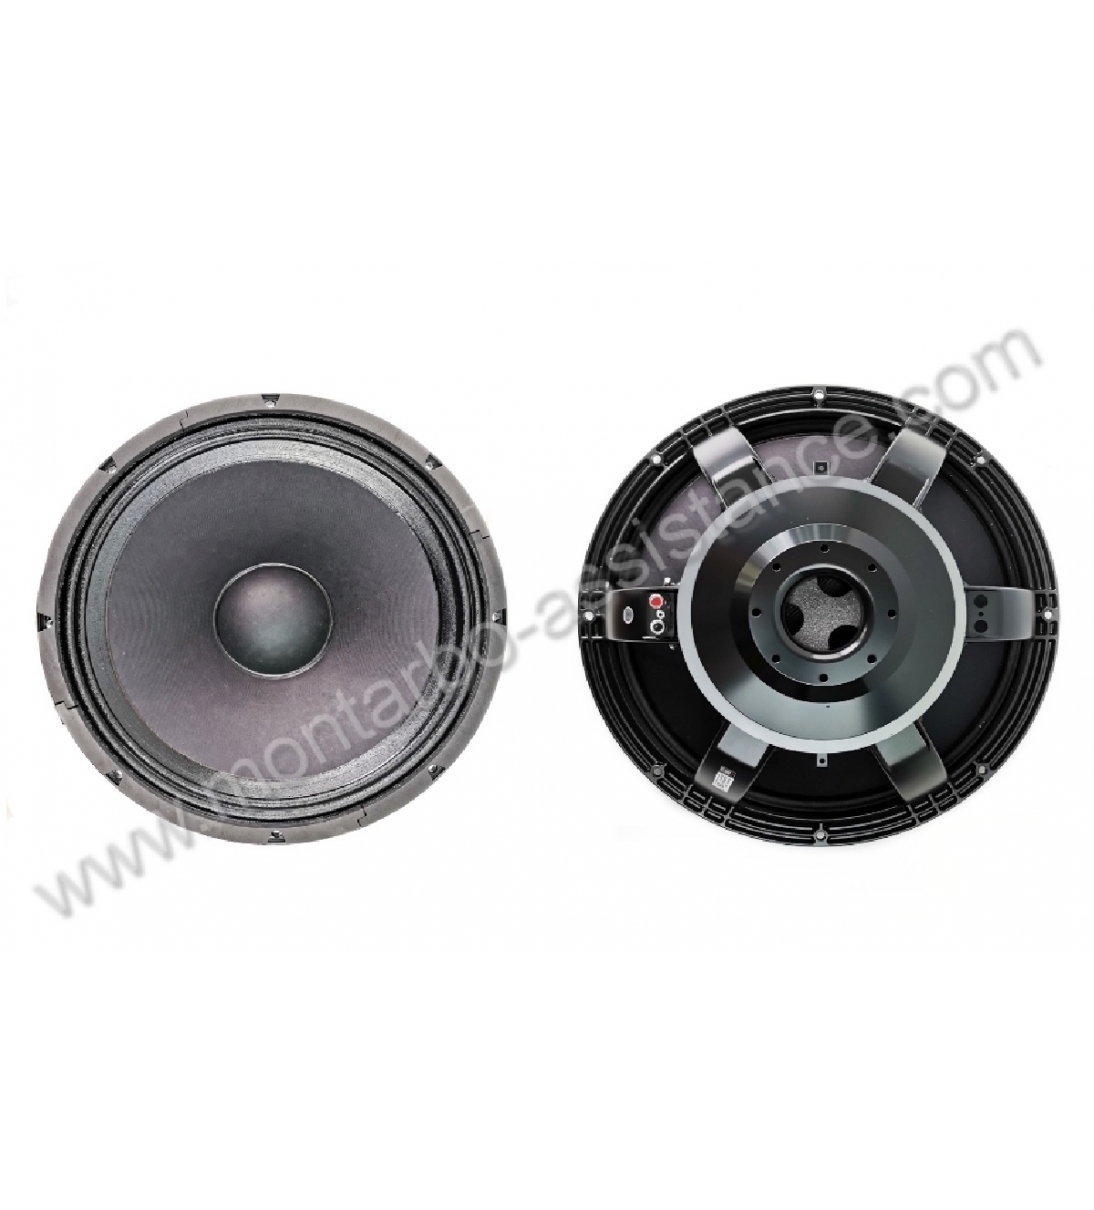 AS118 18" Woofer per Earth 118